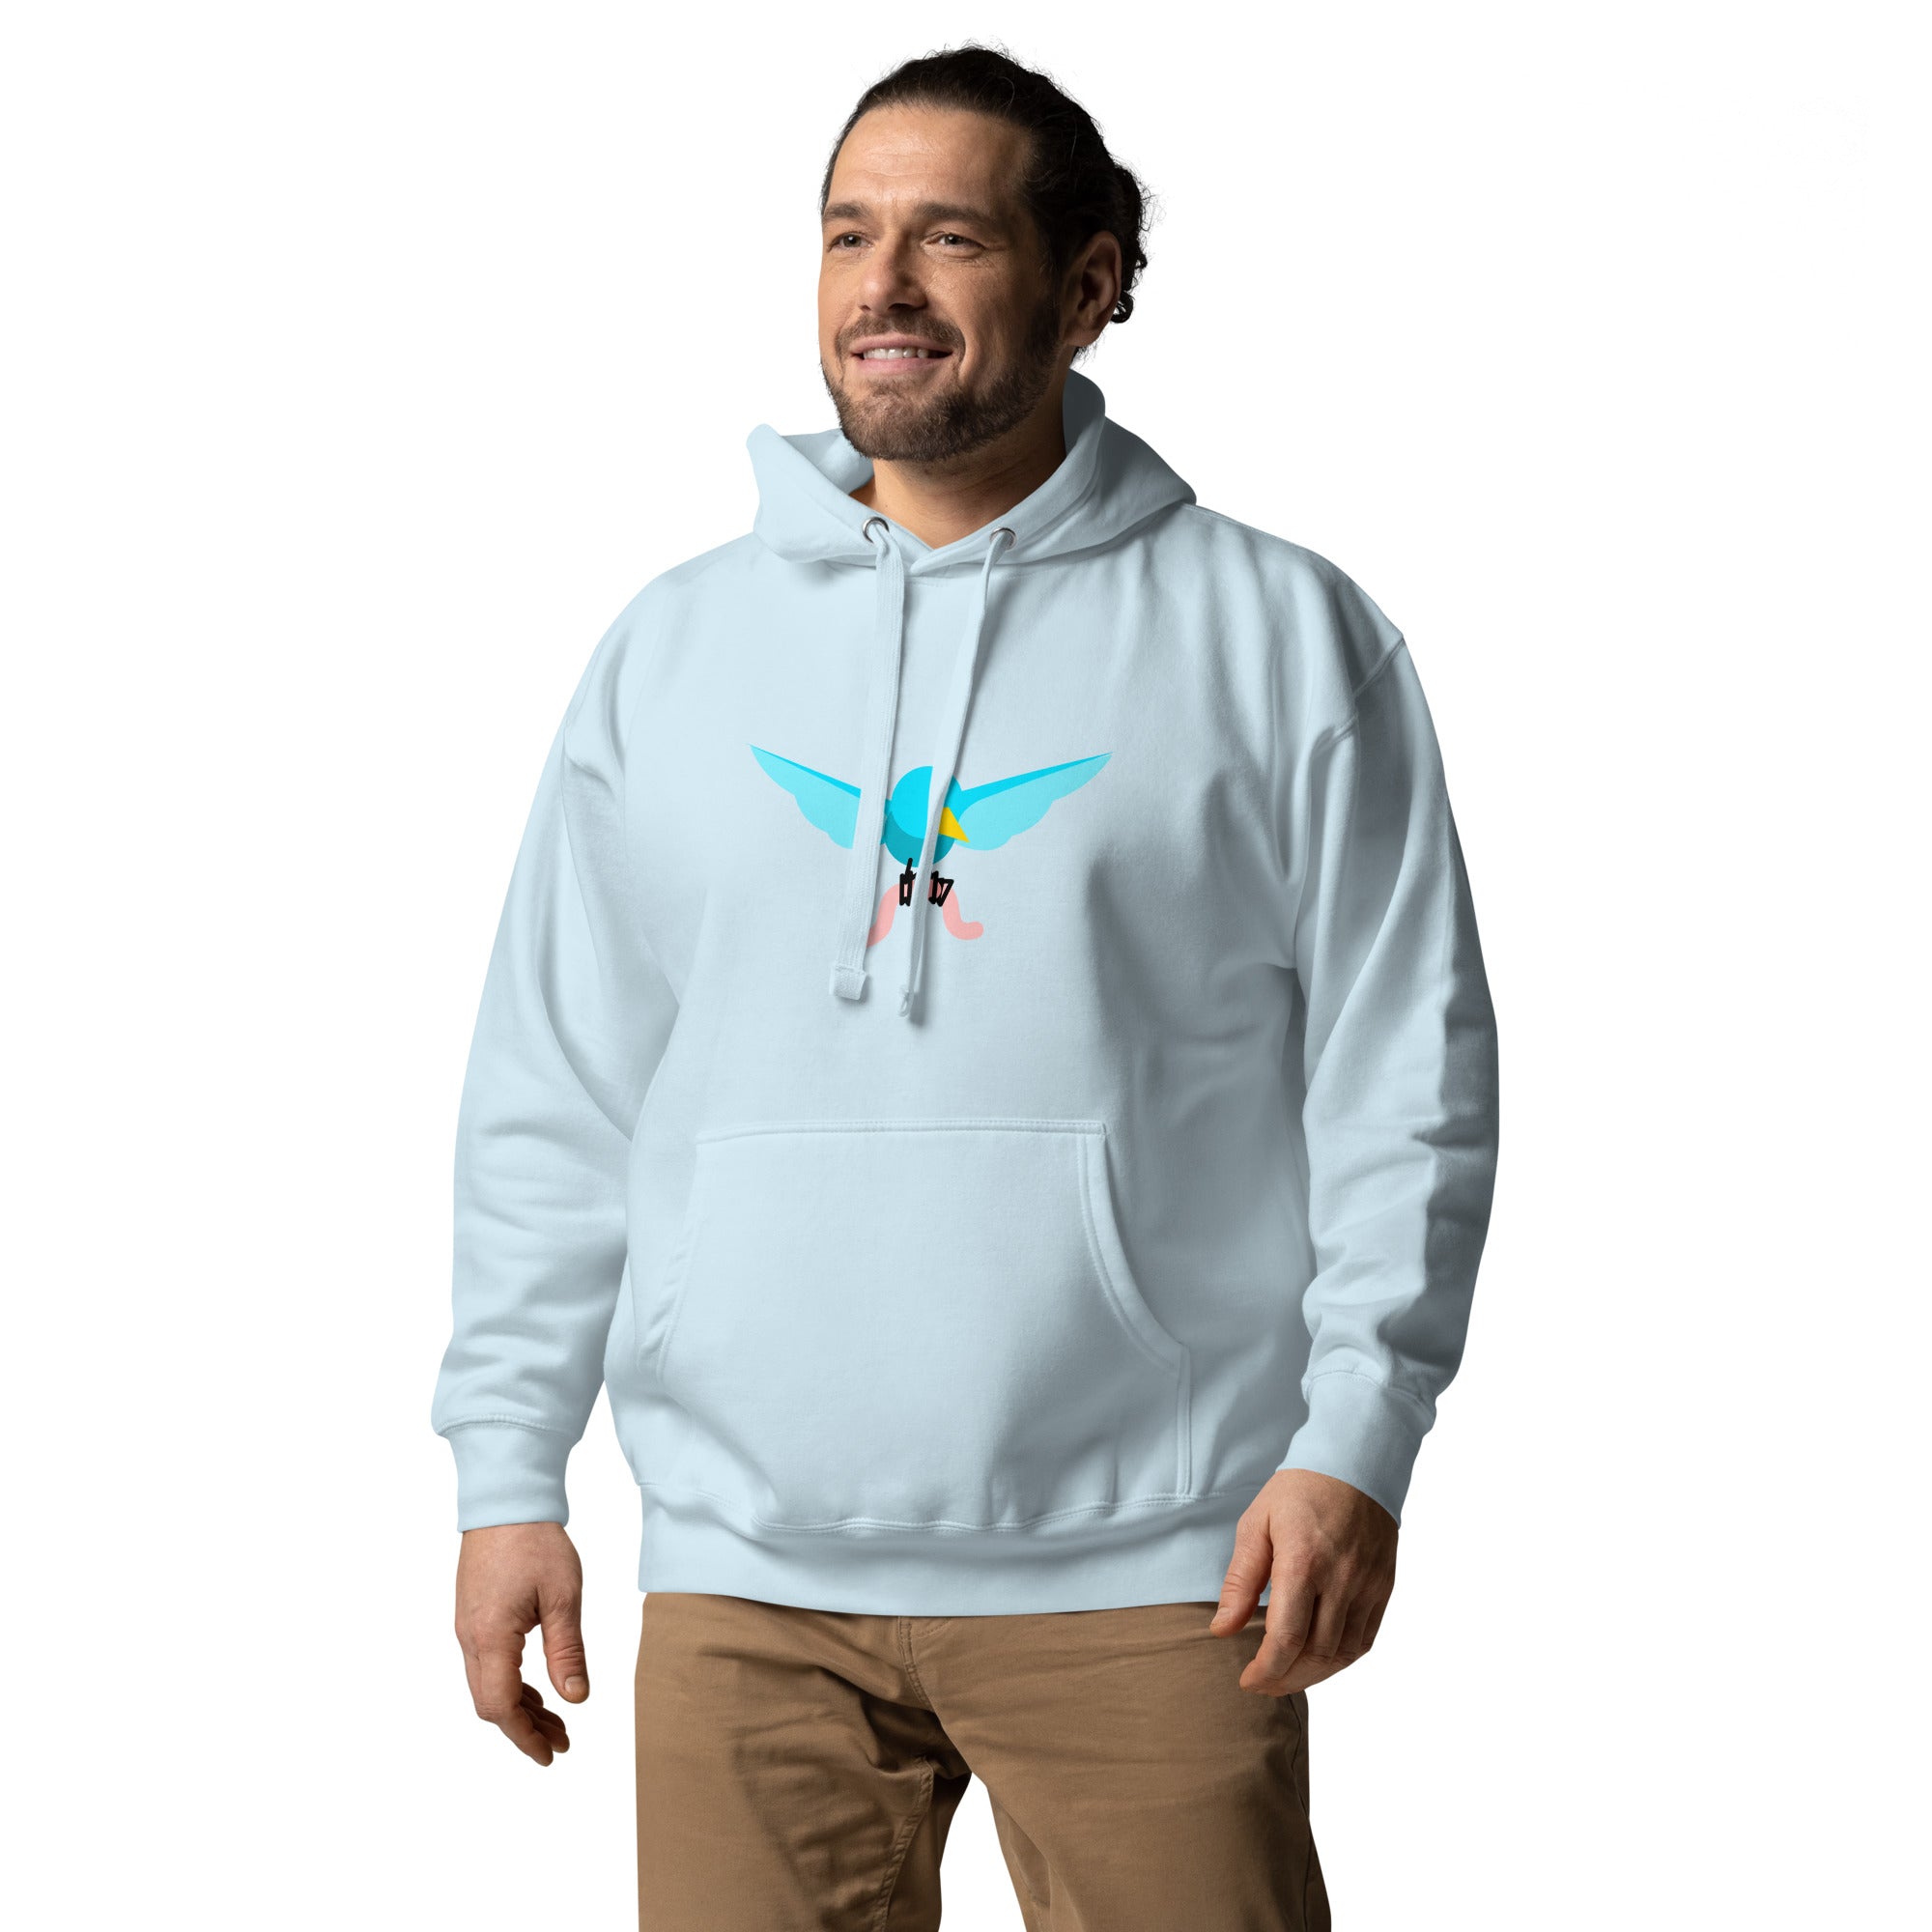 Graphic Novelty Hoodie - Early Bird